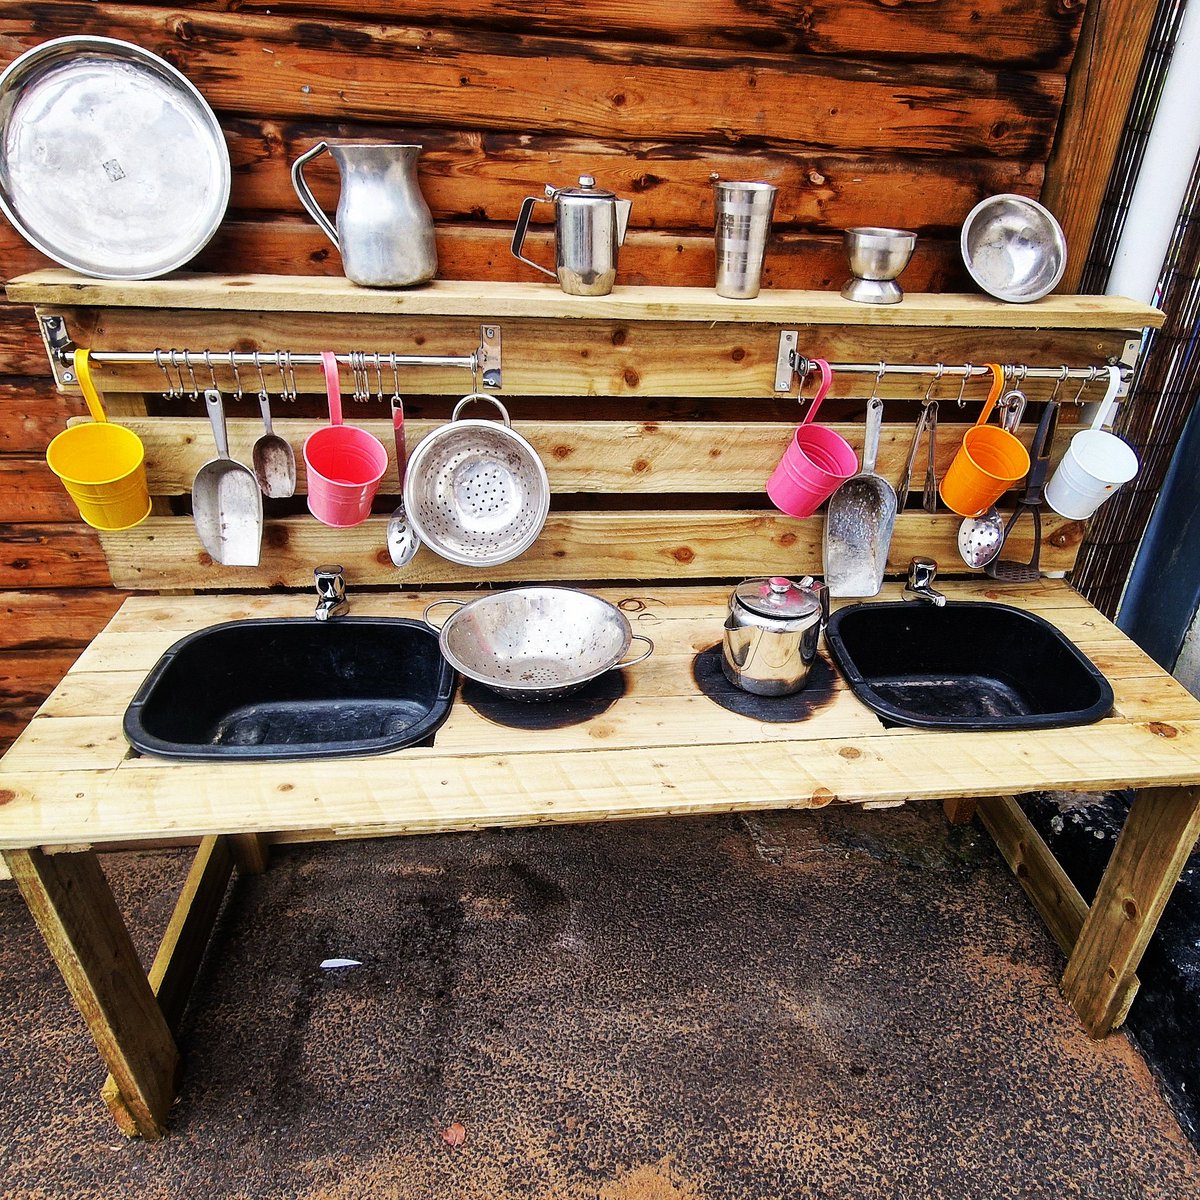 My dad made this mud kitchen for our EYFS children! Even at 32, I still need the support and help from my parents 🙈🥰. I have so many ideas for different learning opportunities using this! #eyfs #mudkitchen #outdoorlearning #learningopportunities #earlyyears #outdoorprovision